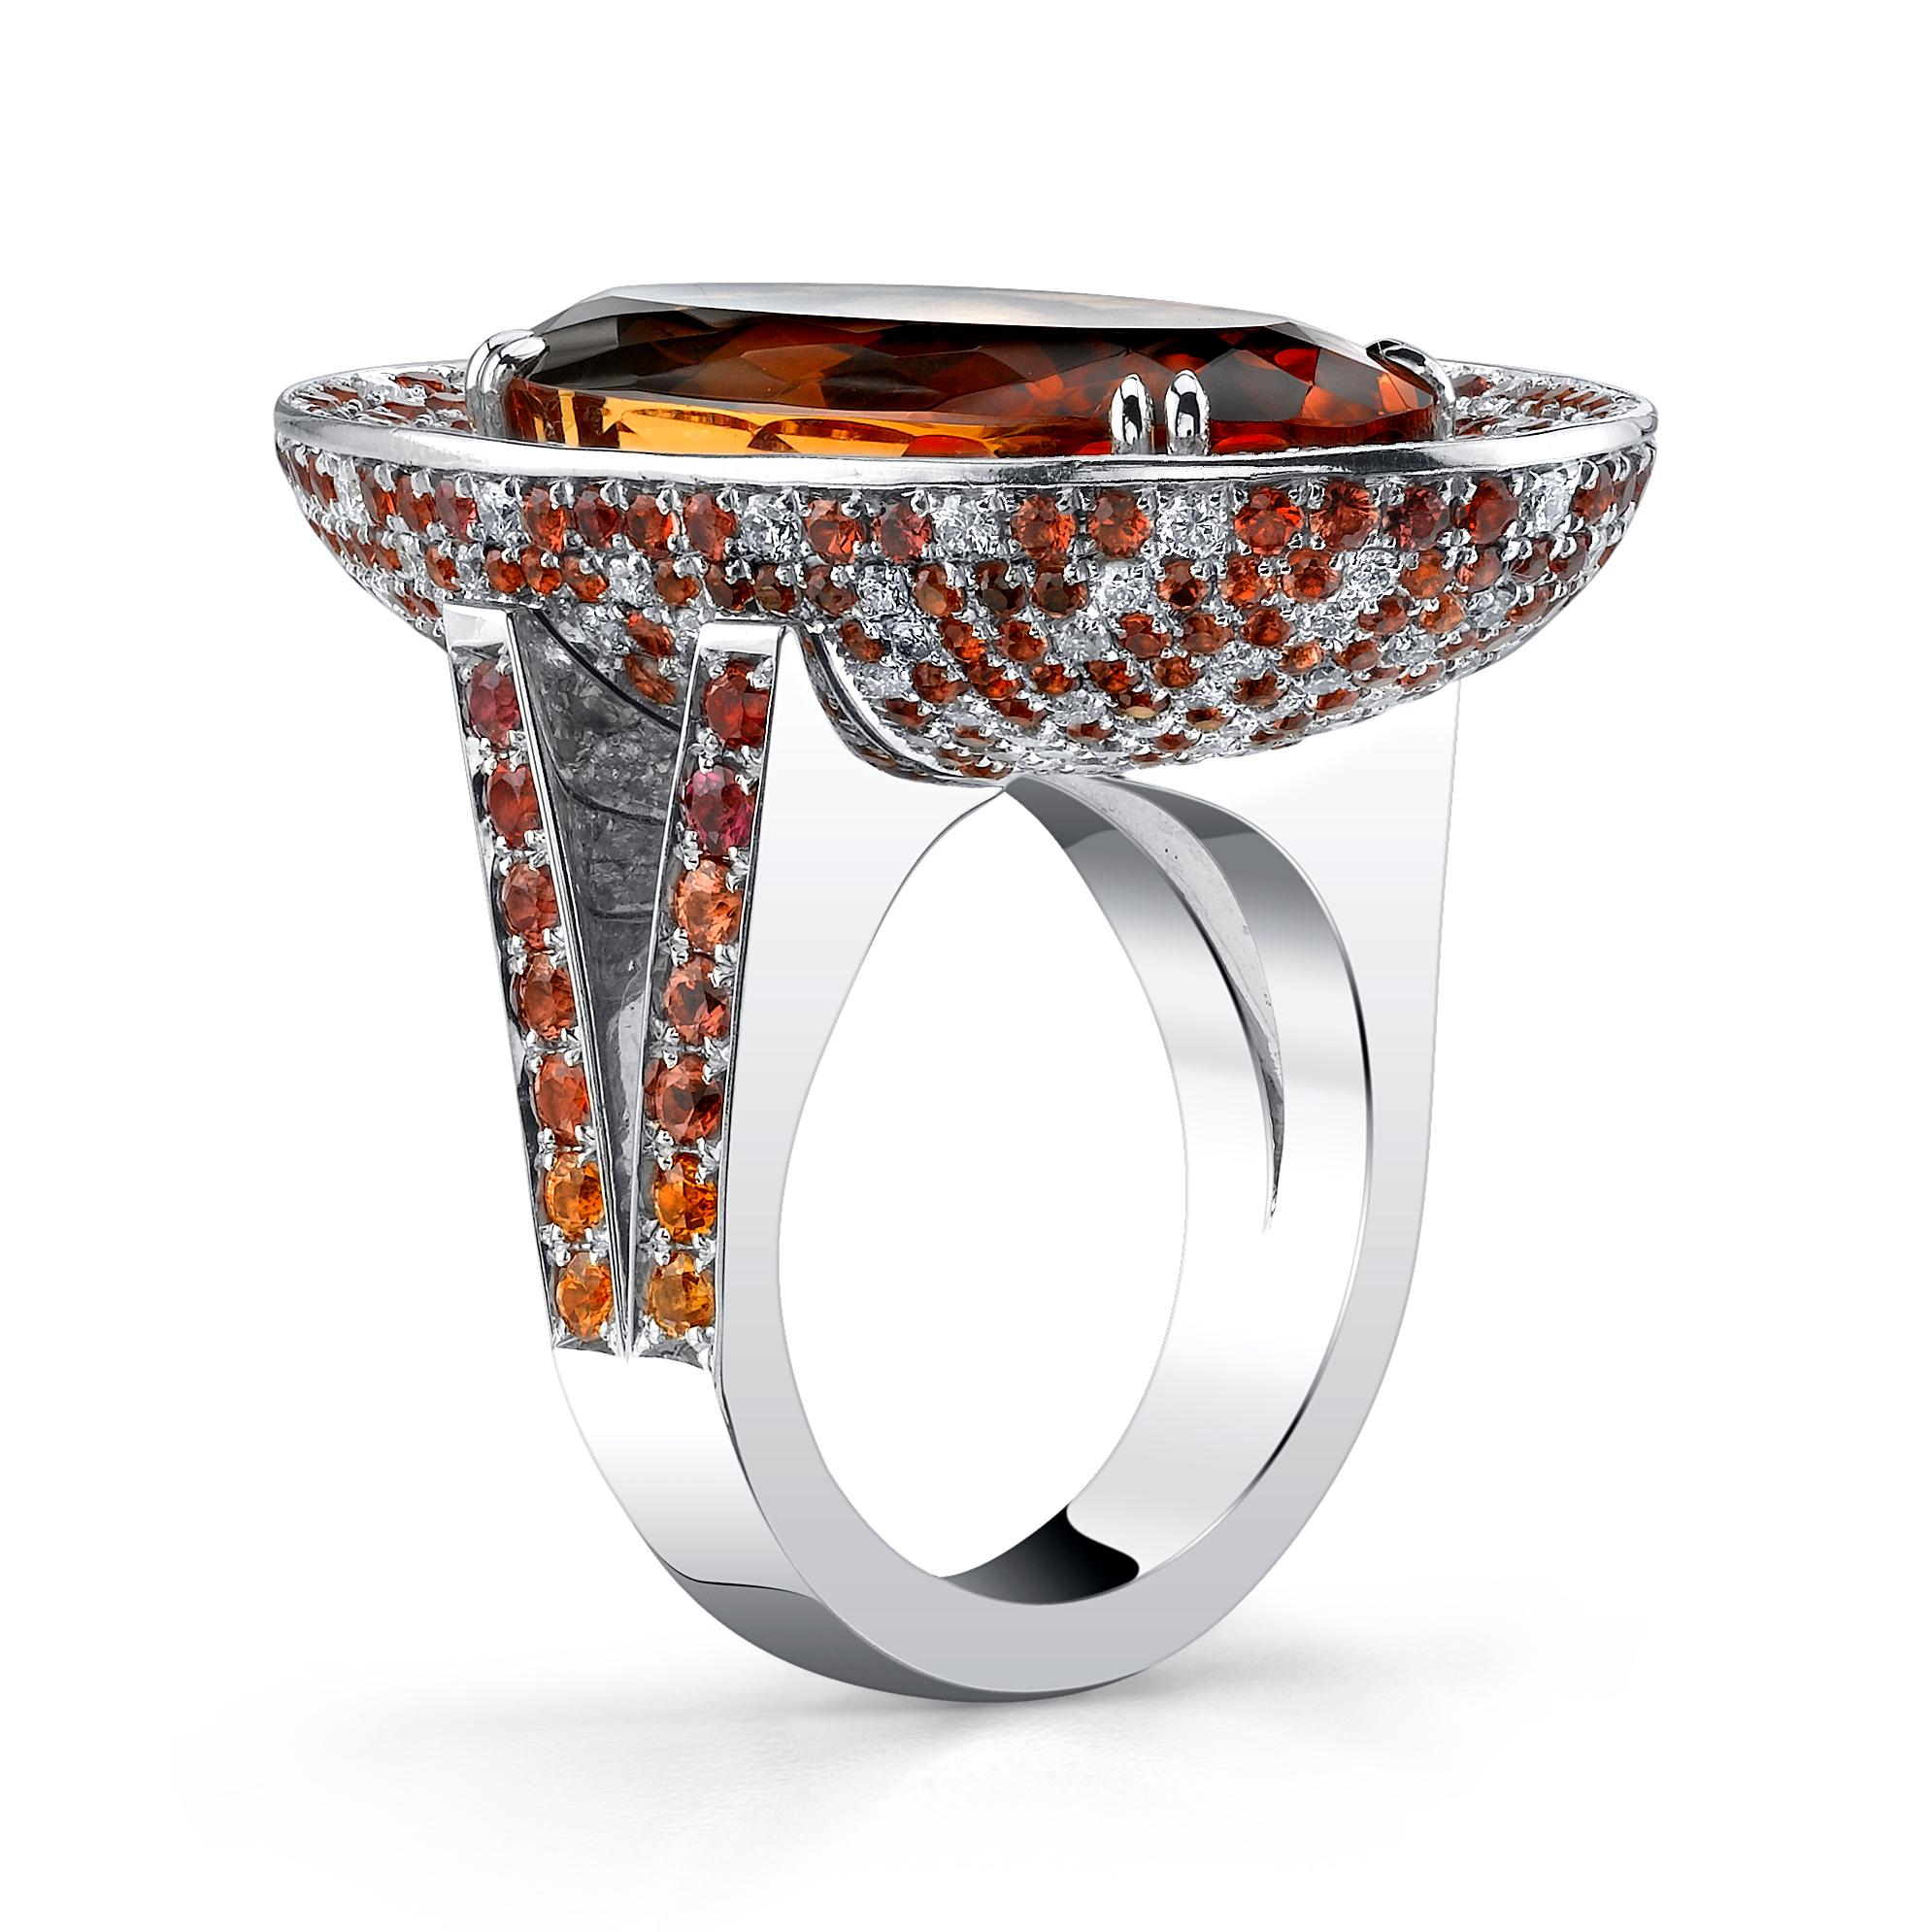 Introducing the Precious Imperial Topaz Ring, set in 18 Karat White Gold and accented with dazzling White Diamonds and Orange Sapphires. The GIA certified center stone boasts a magnificent reddish-orange color with slightly pinkish undertones,